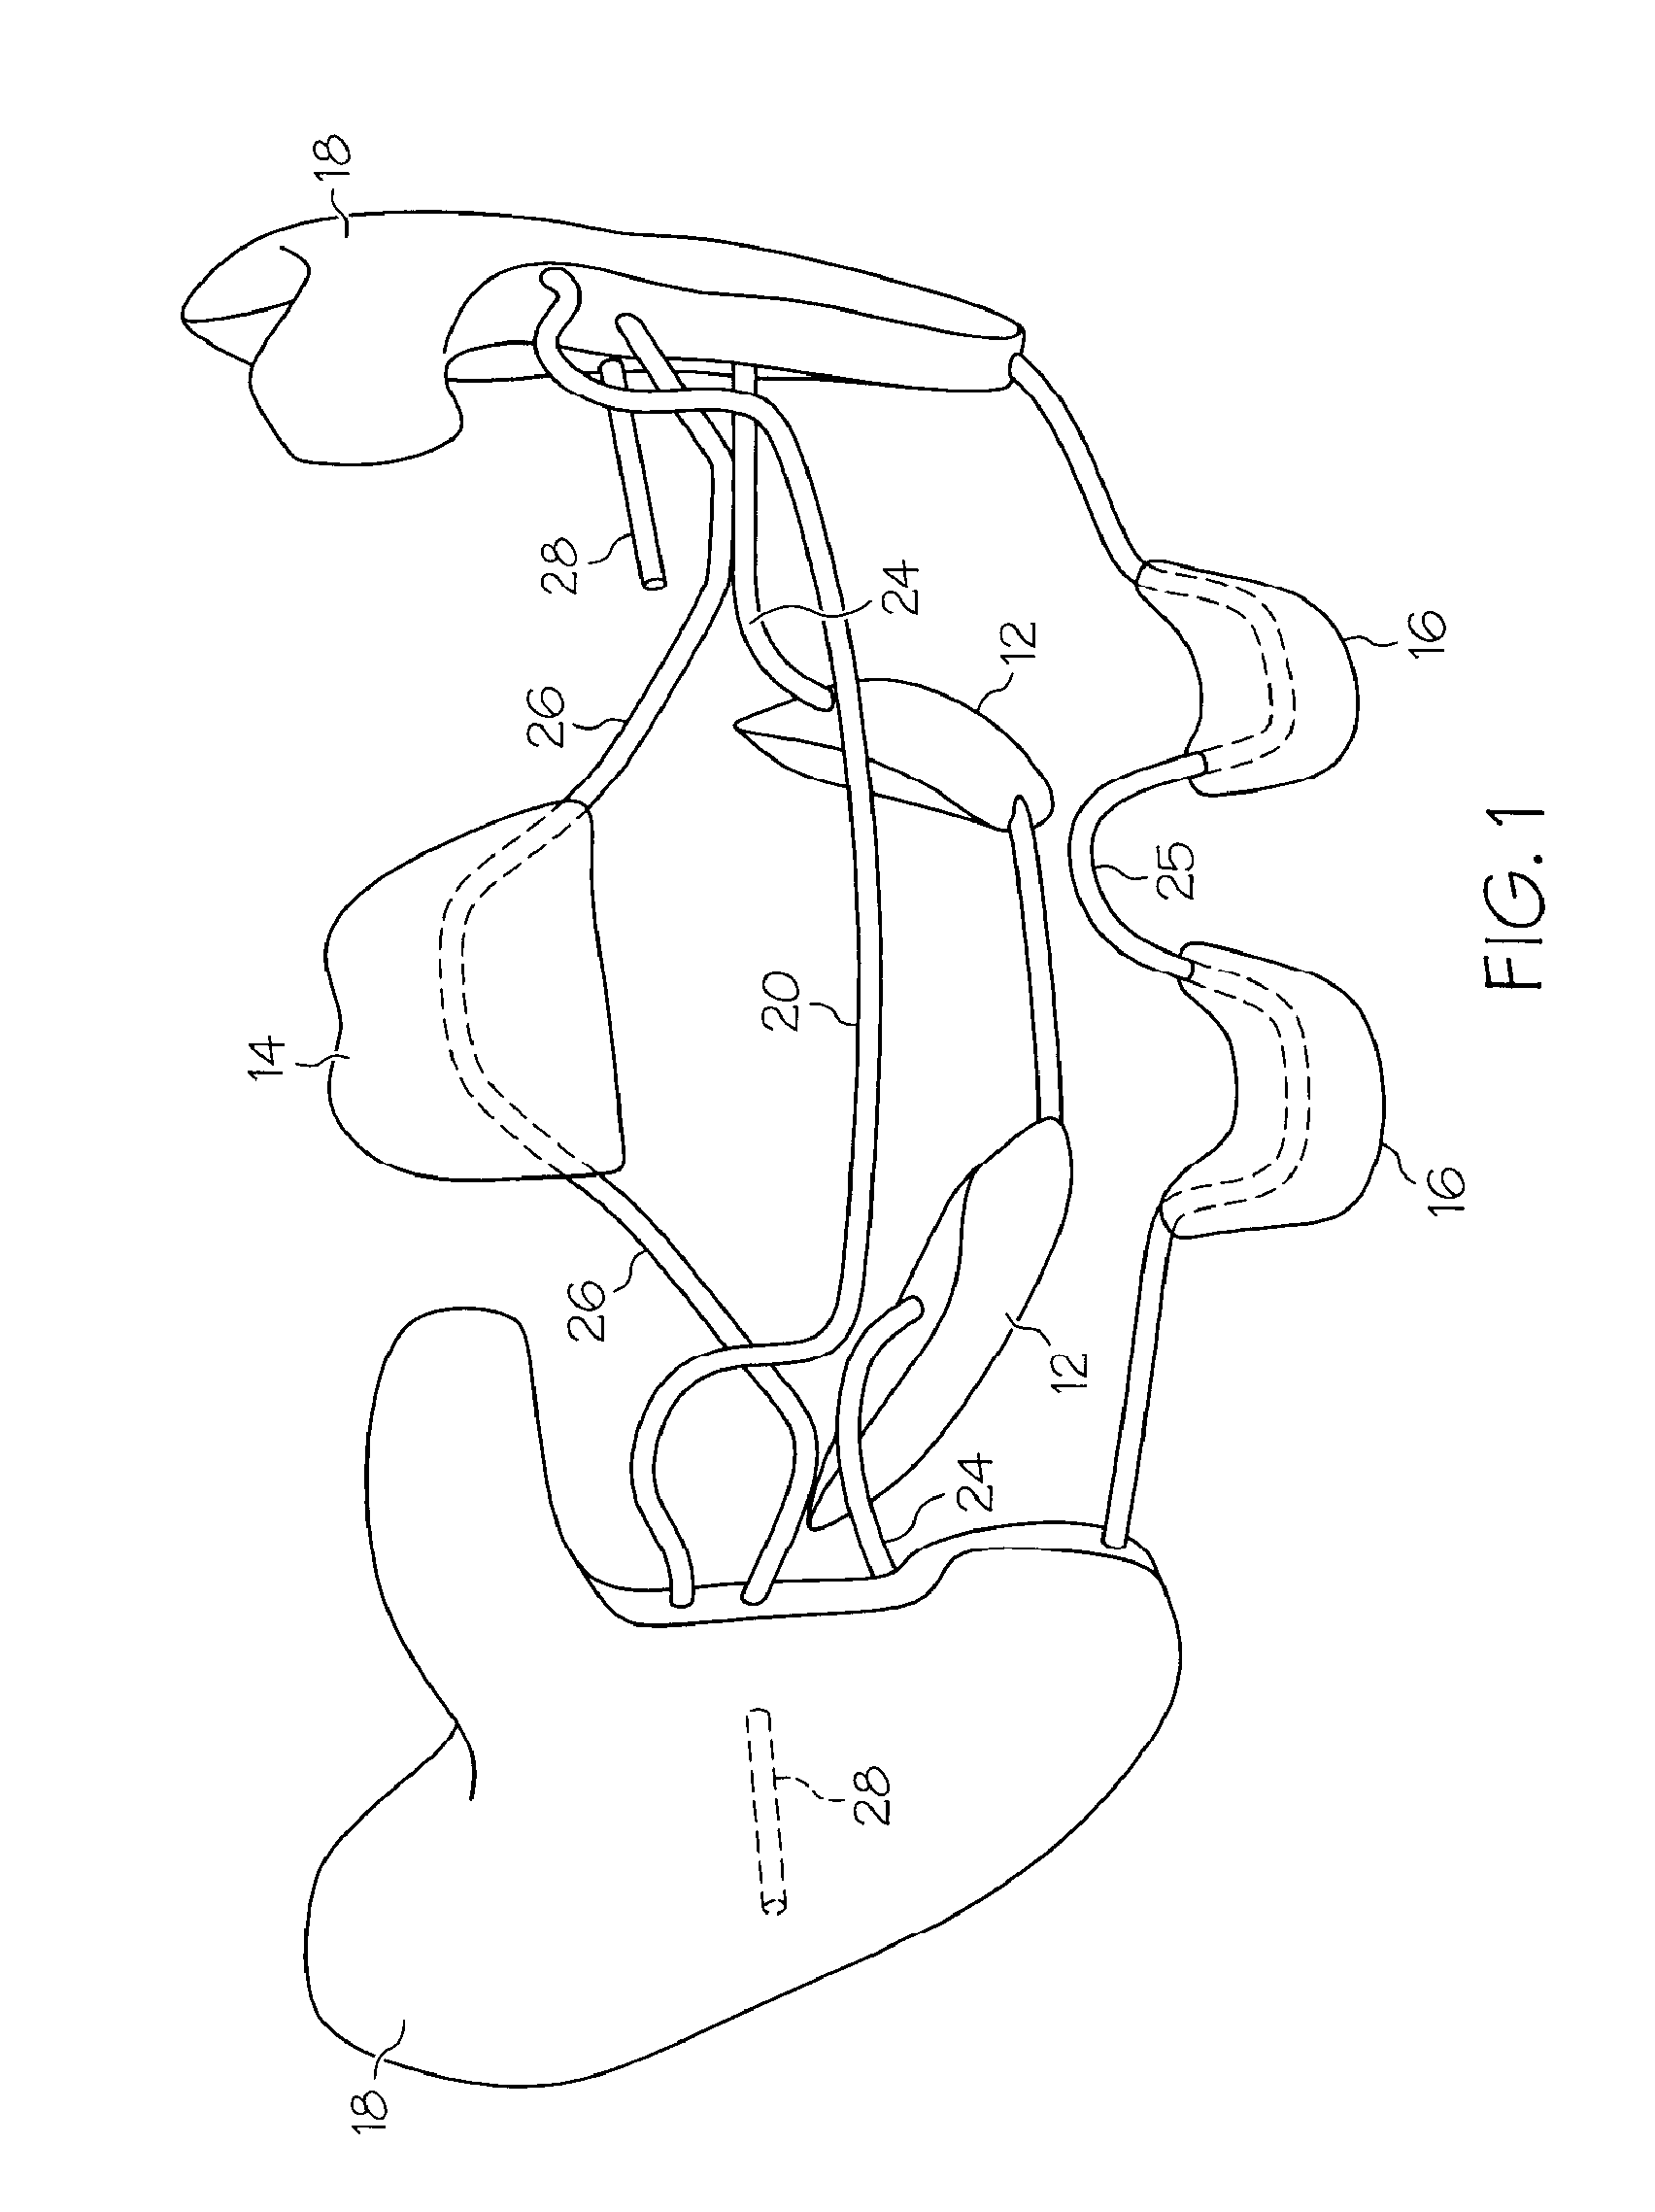 Intraoral apparatus for treating upper airway disorders